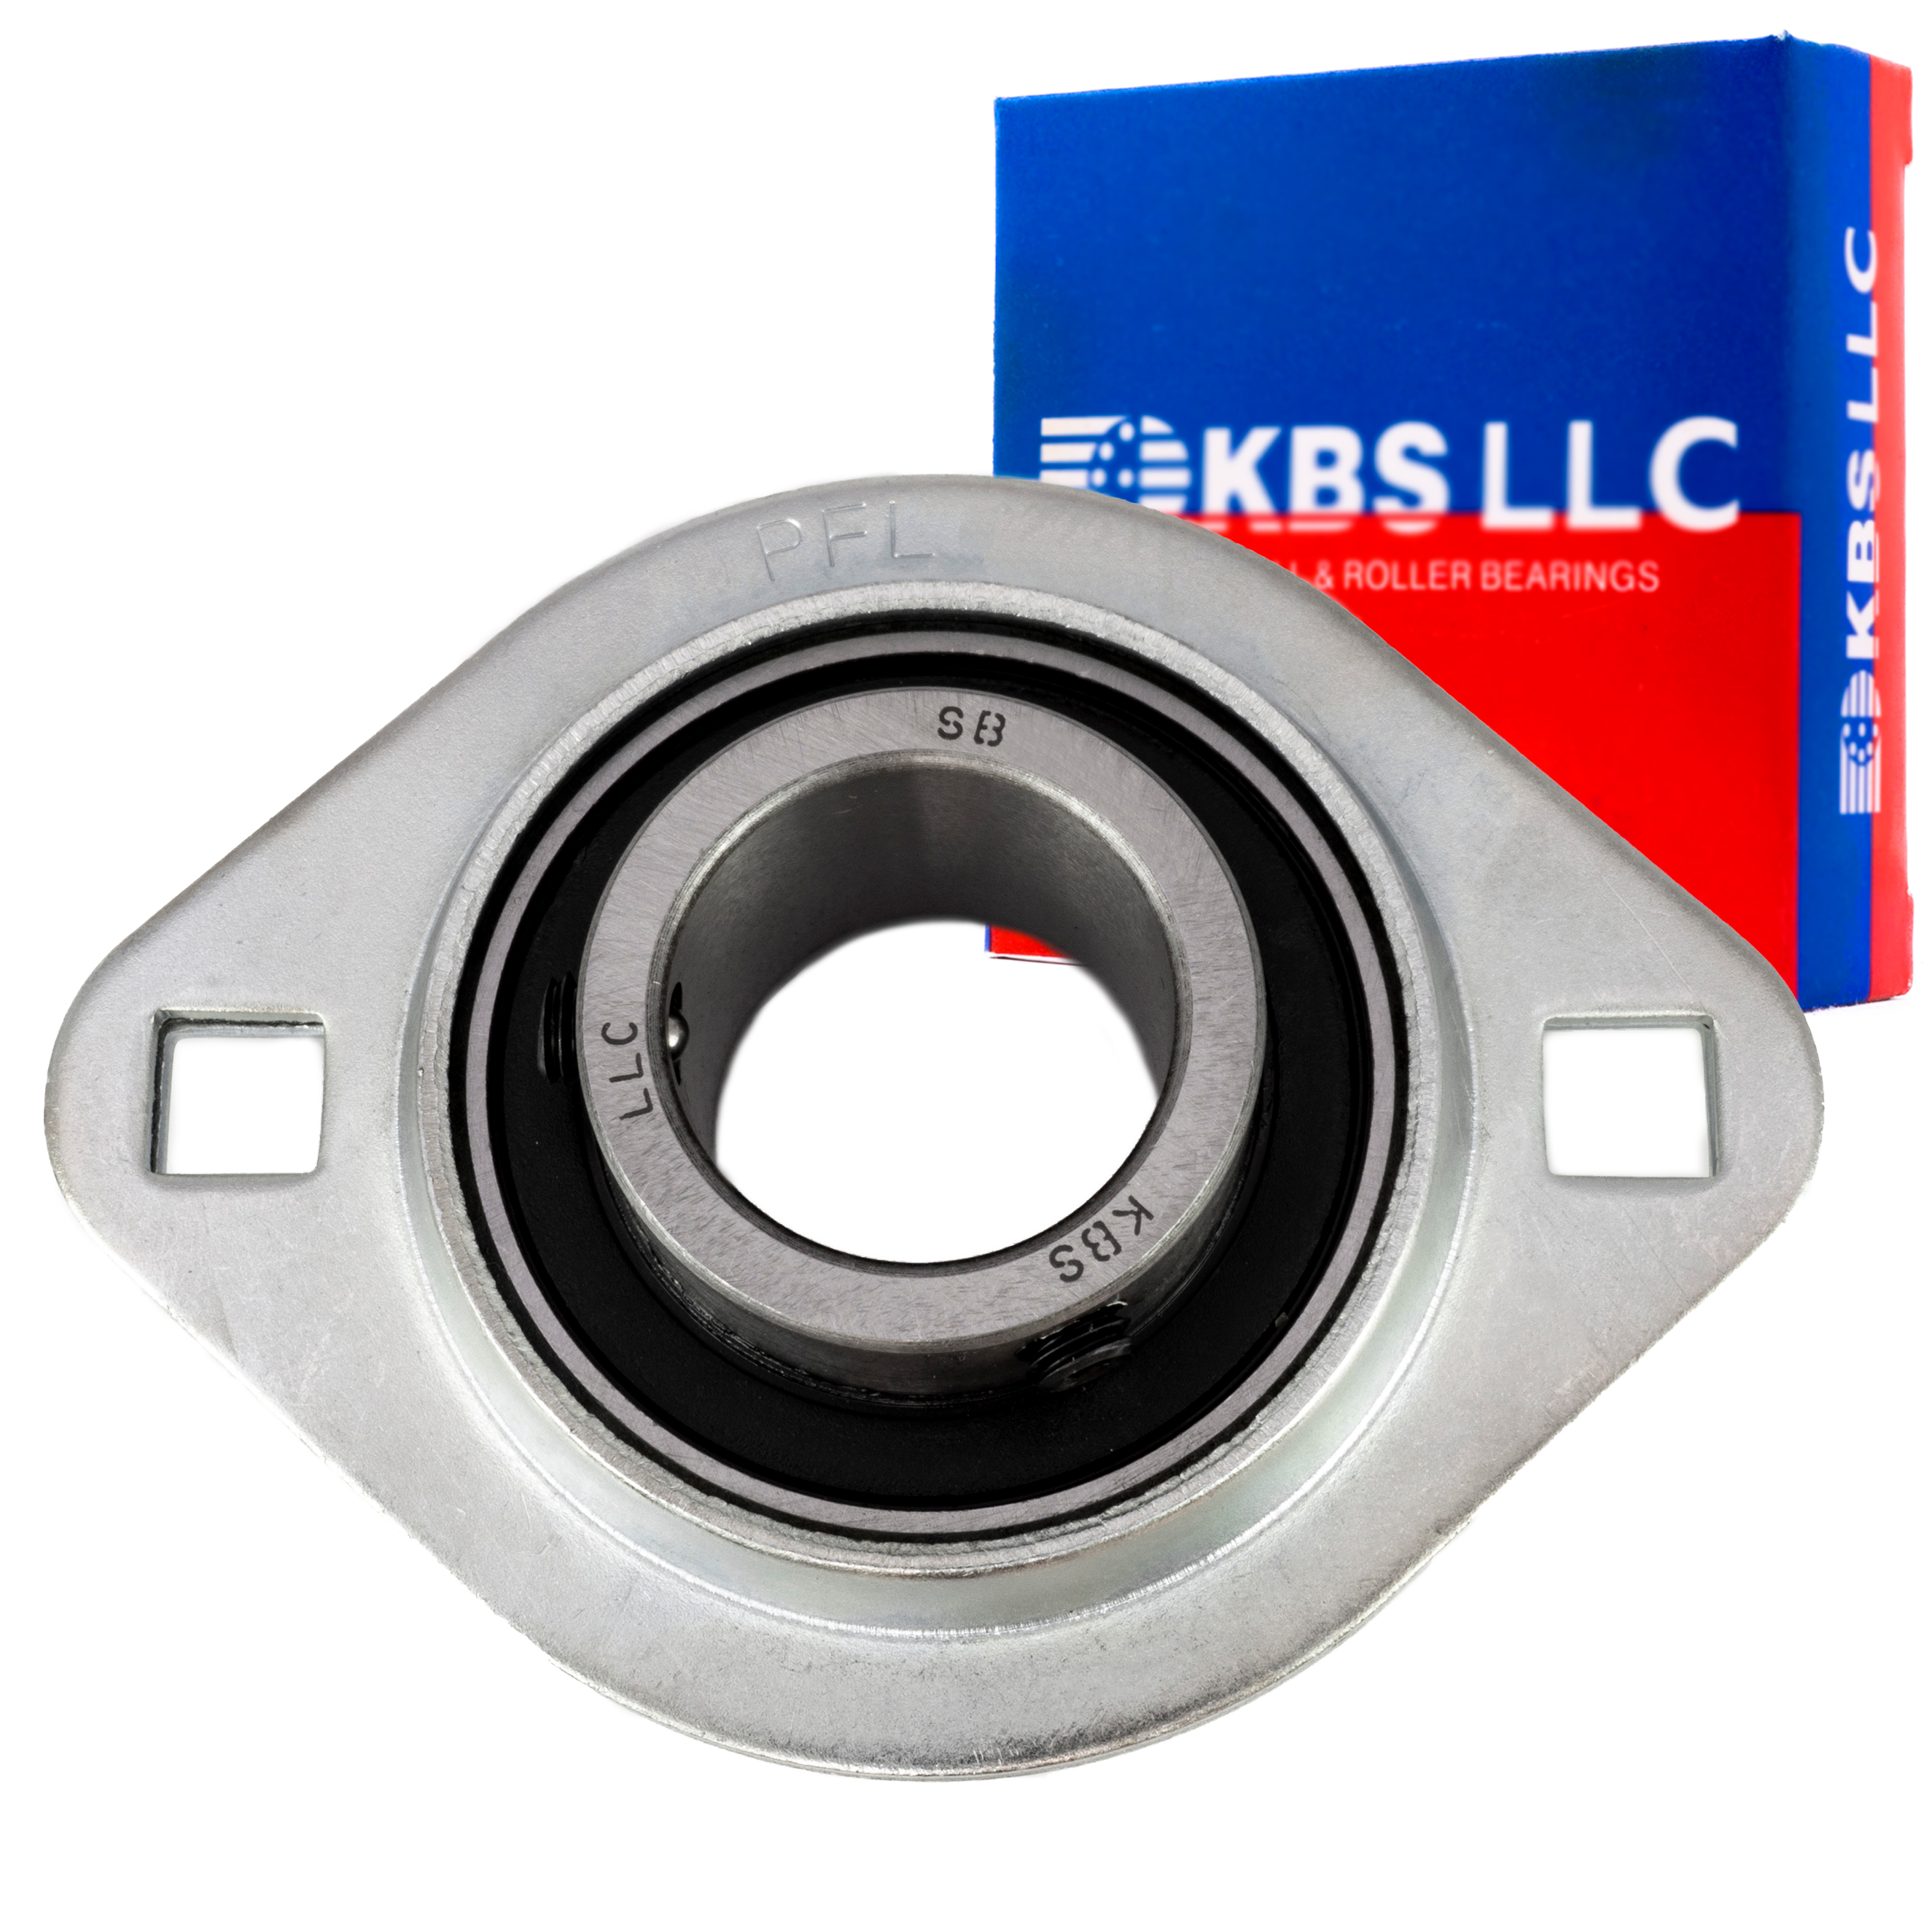 PFL205 1 Set of Oval 2 Bolt Pressed Steel Bearing Housing for 205 inserts 